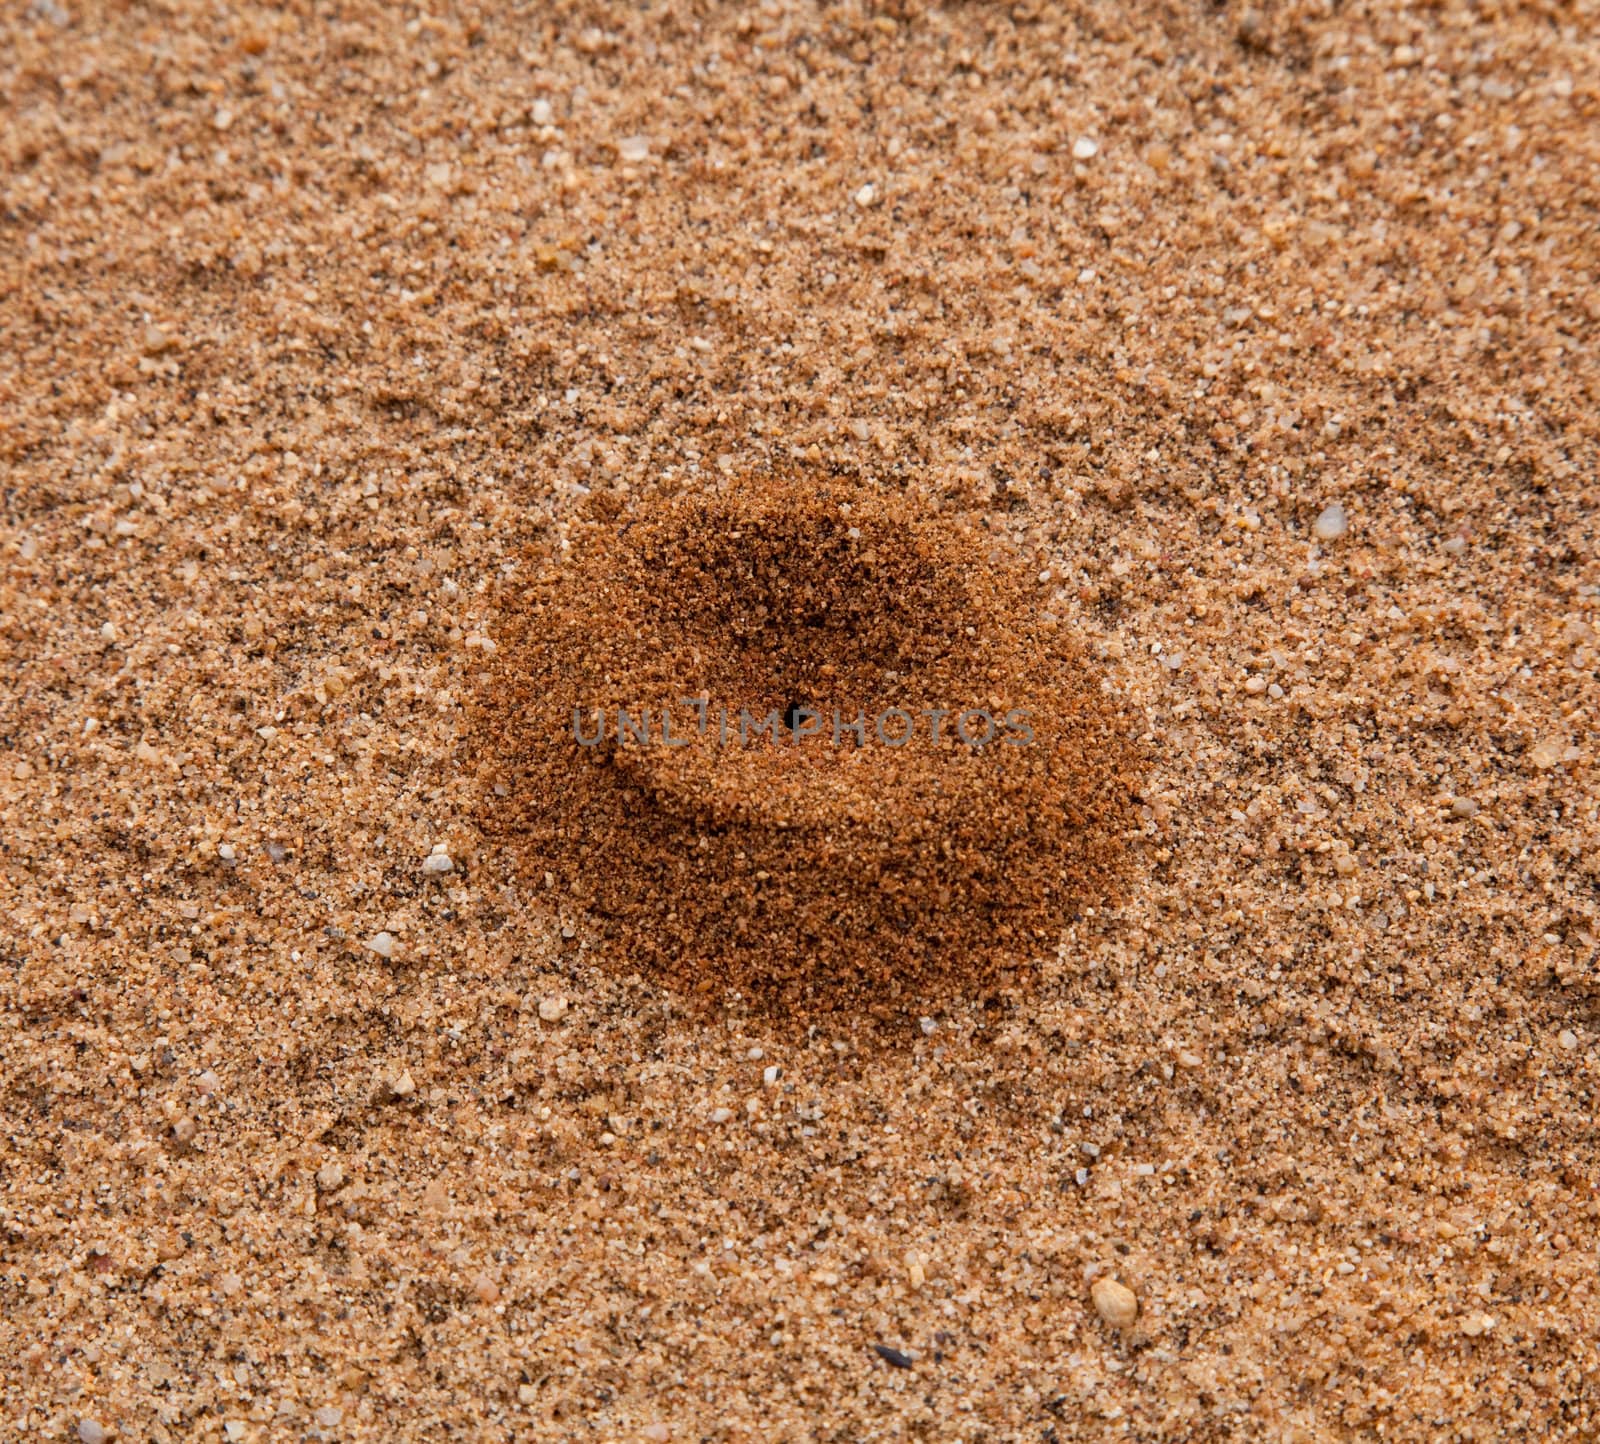 Small sand pile in desert formed by ant by steheap